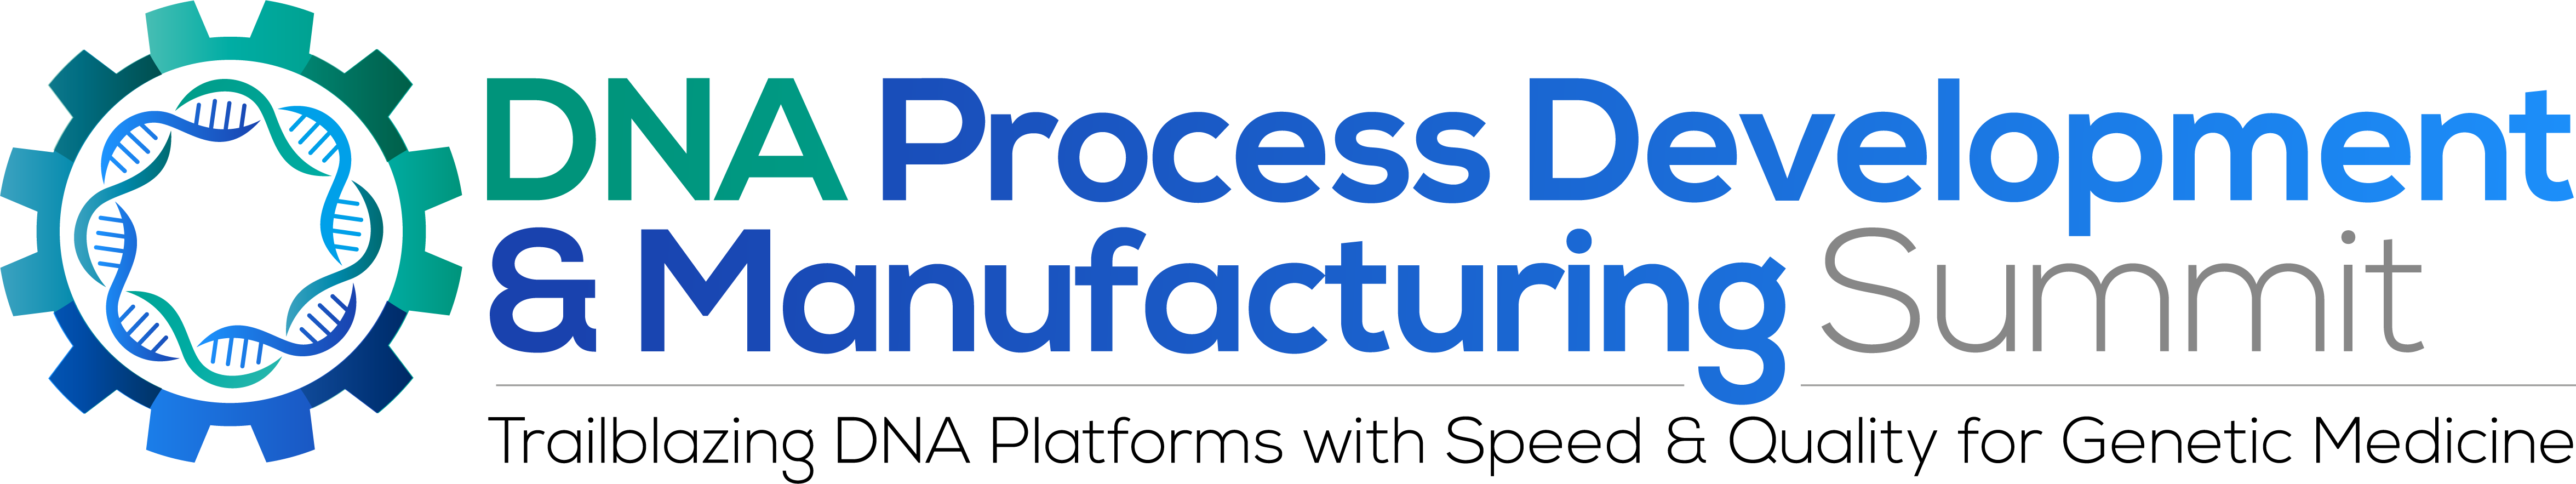 DNA Process Development and Manufacturing Summit Logo